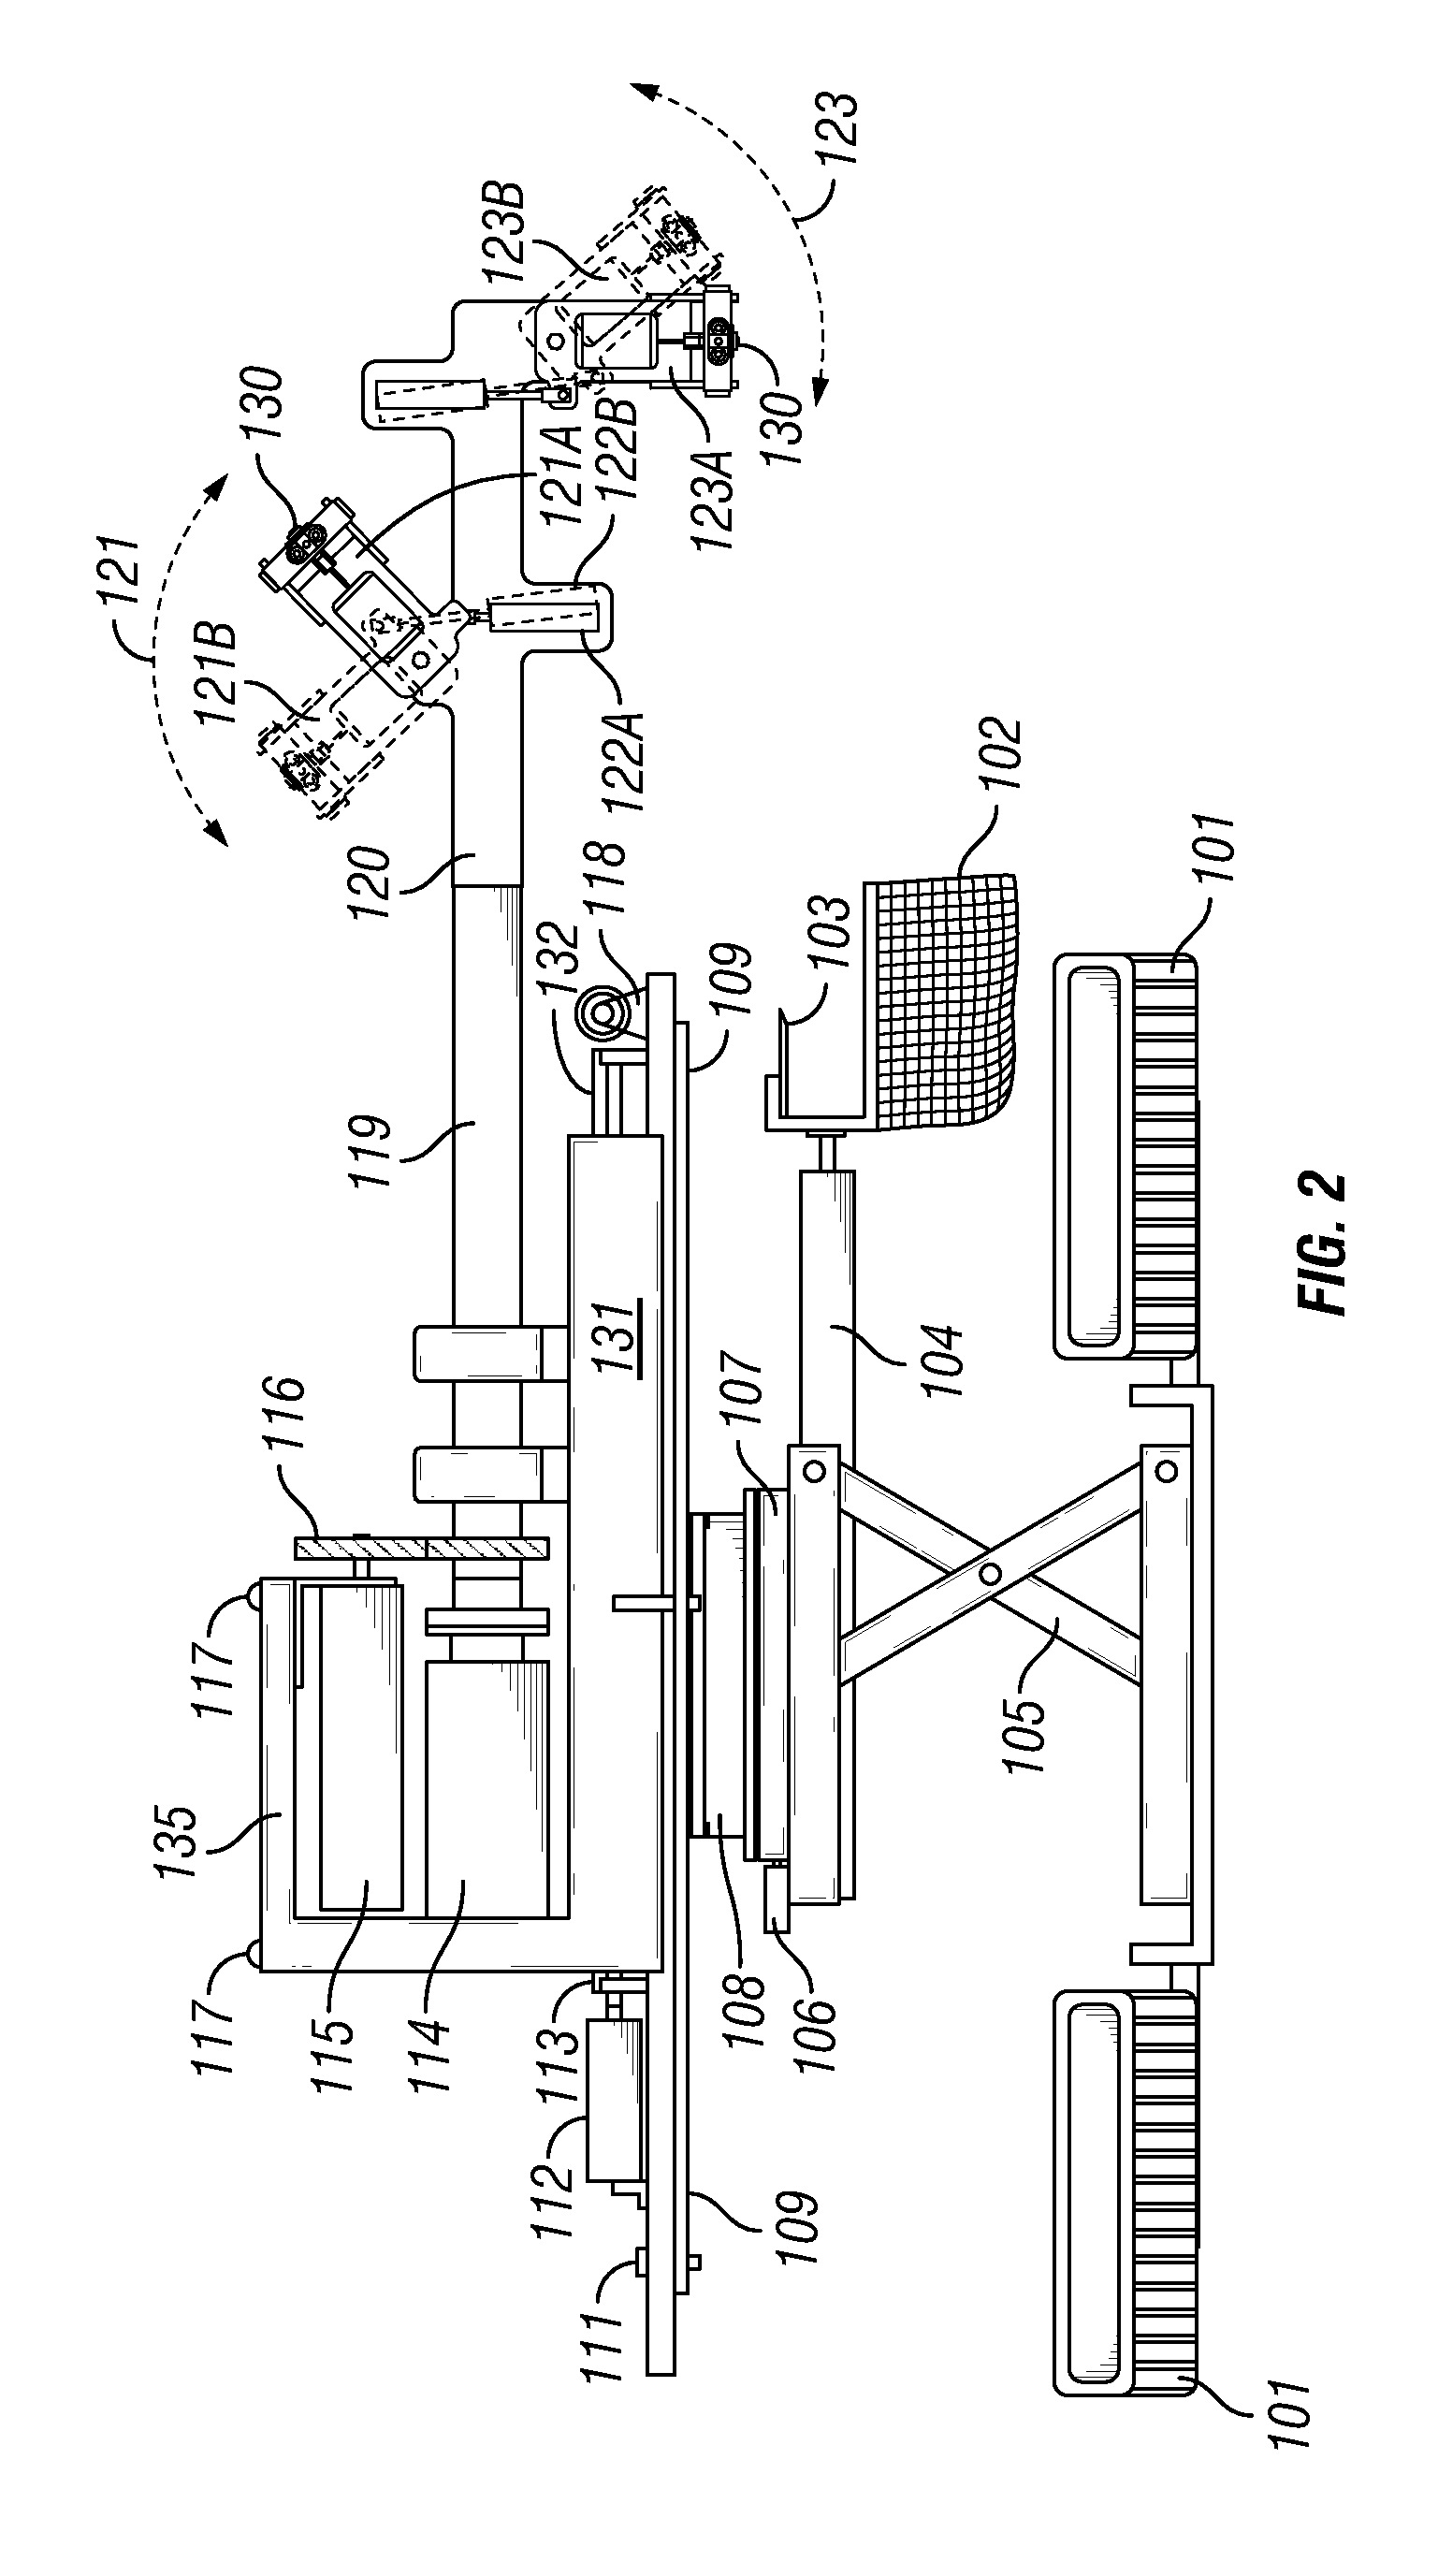 Apparatus and method for lining large diameter pipe with environmentally compatible impervious membrane